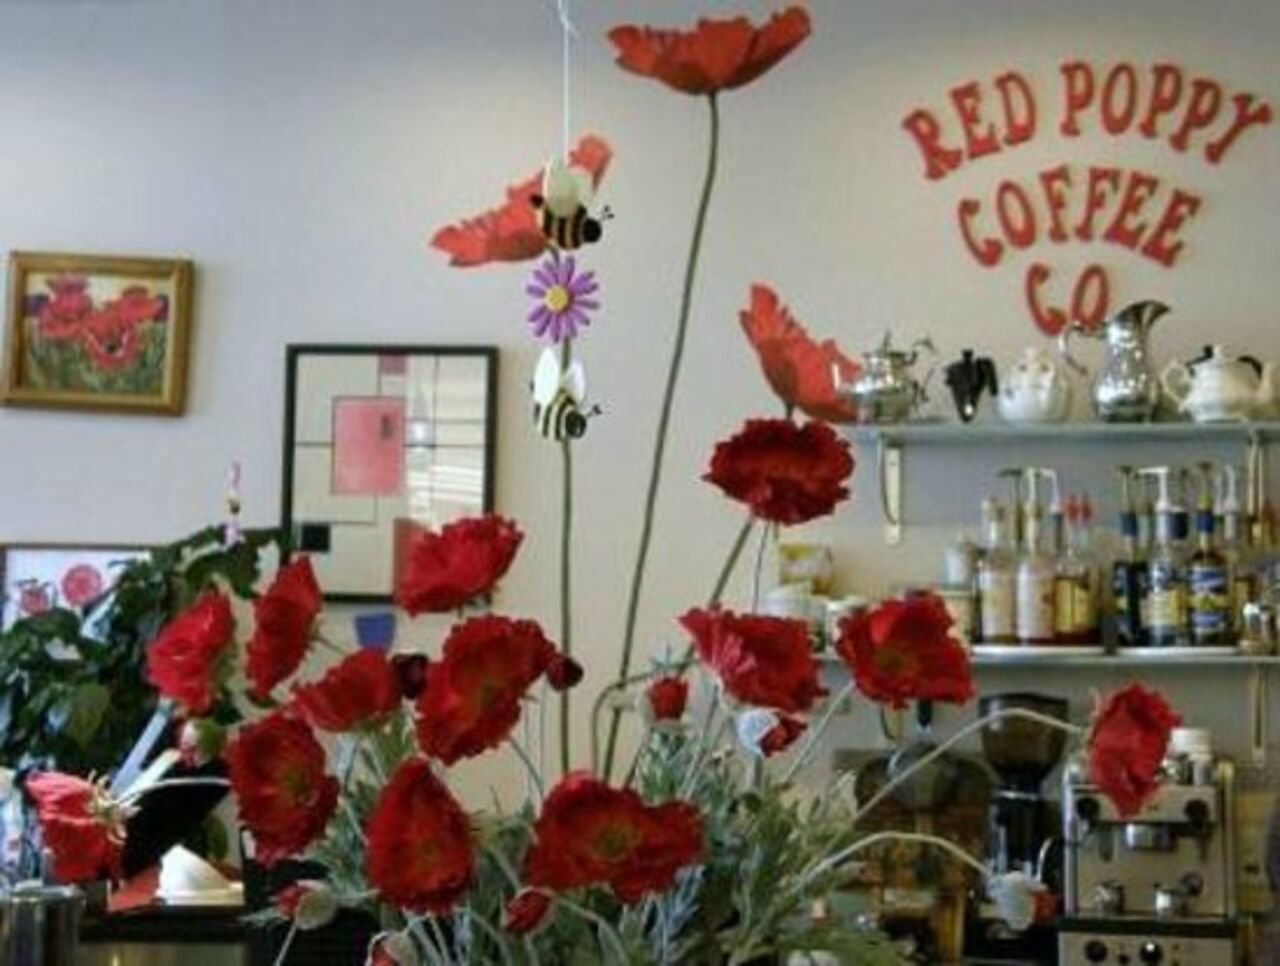 A photo of Red Poppy Coffee Co.